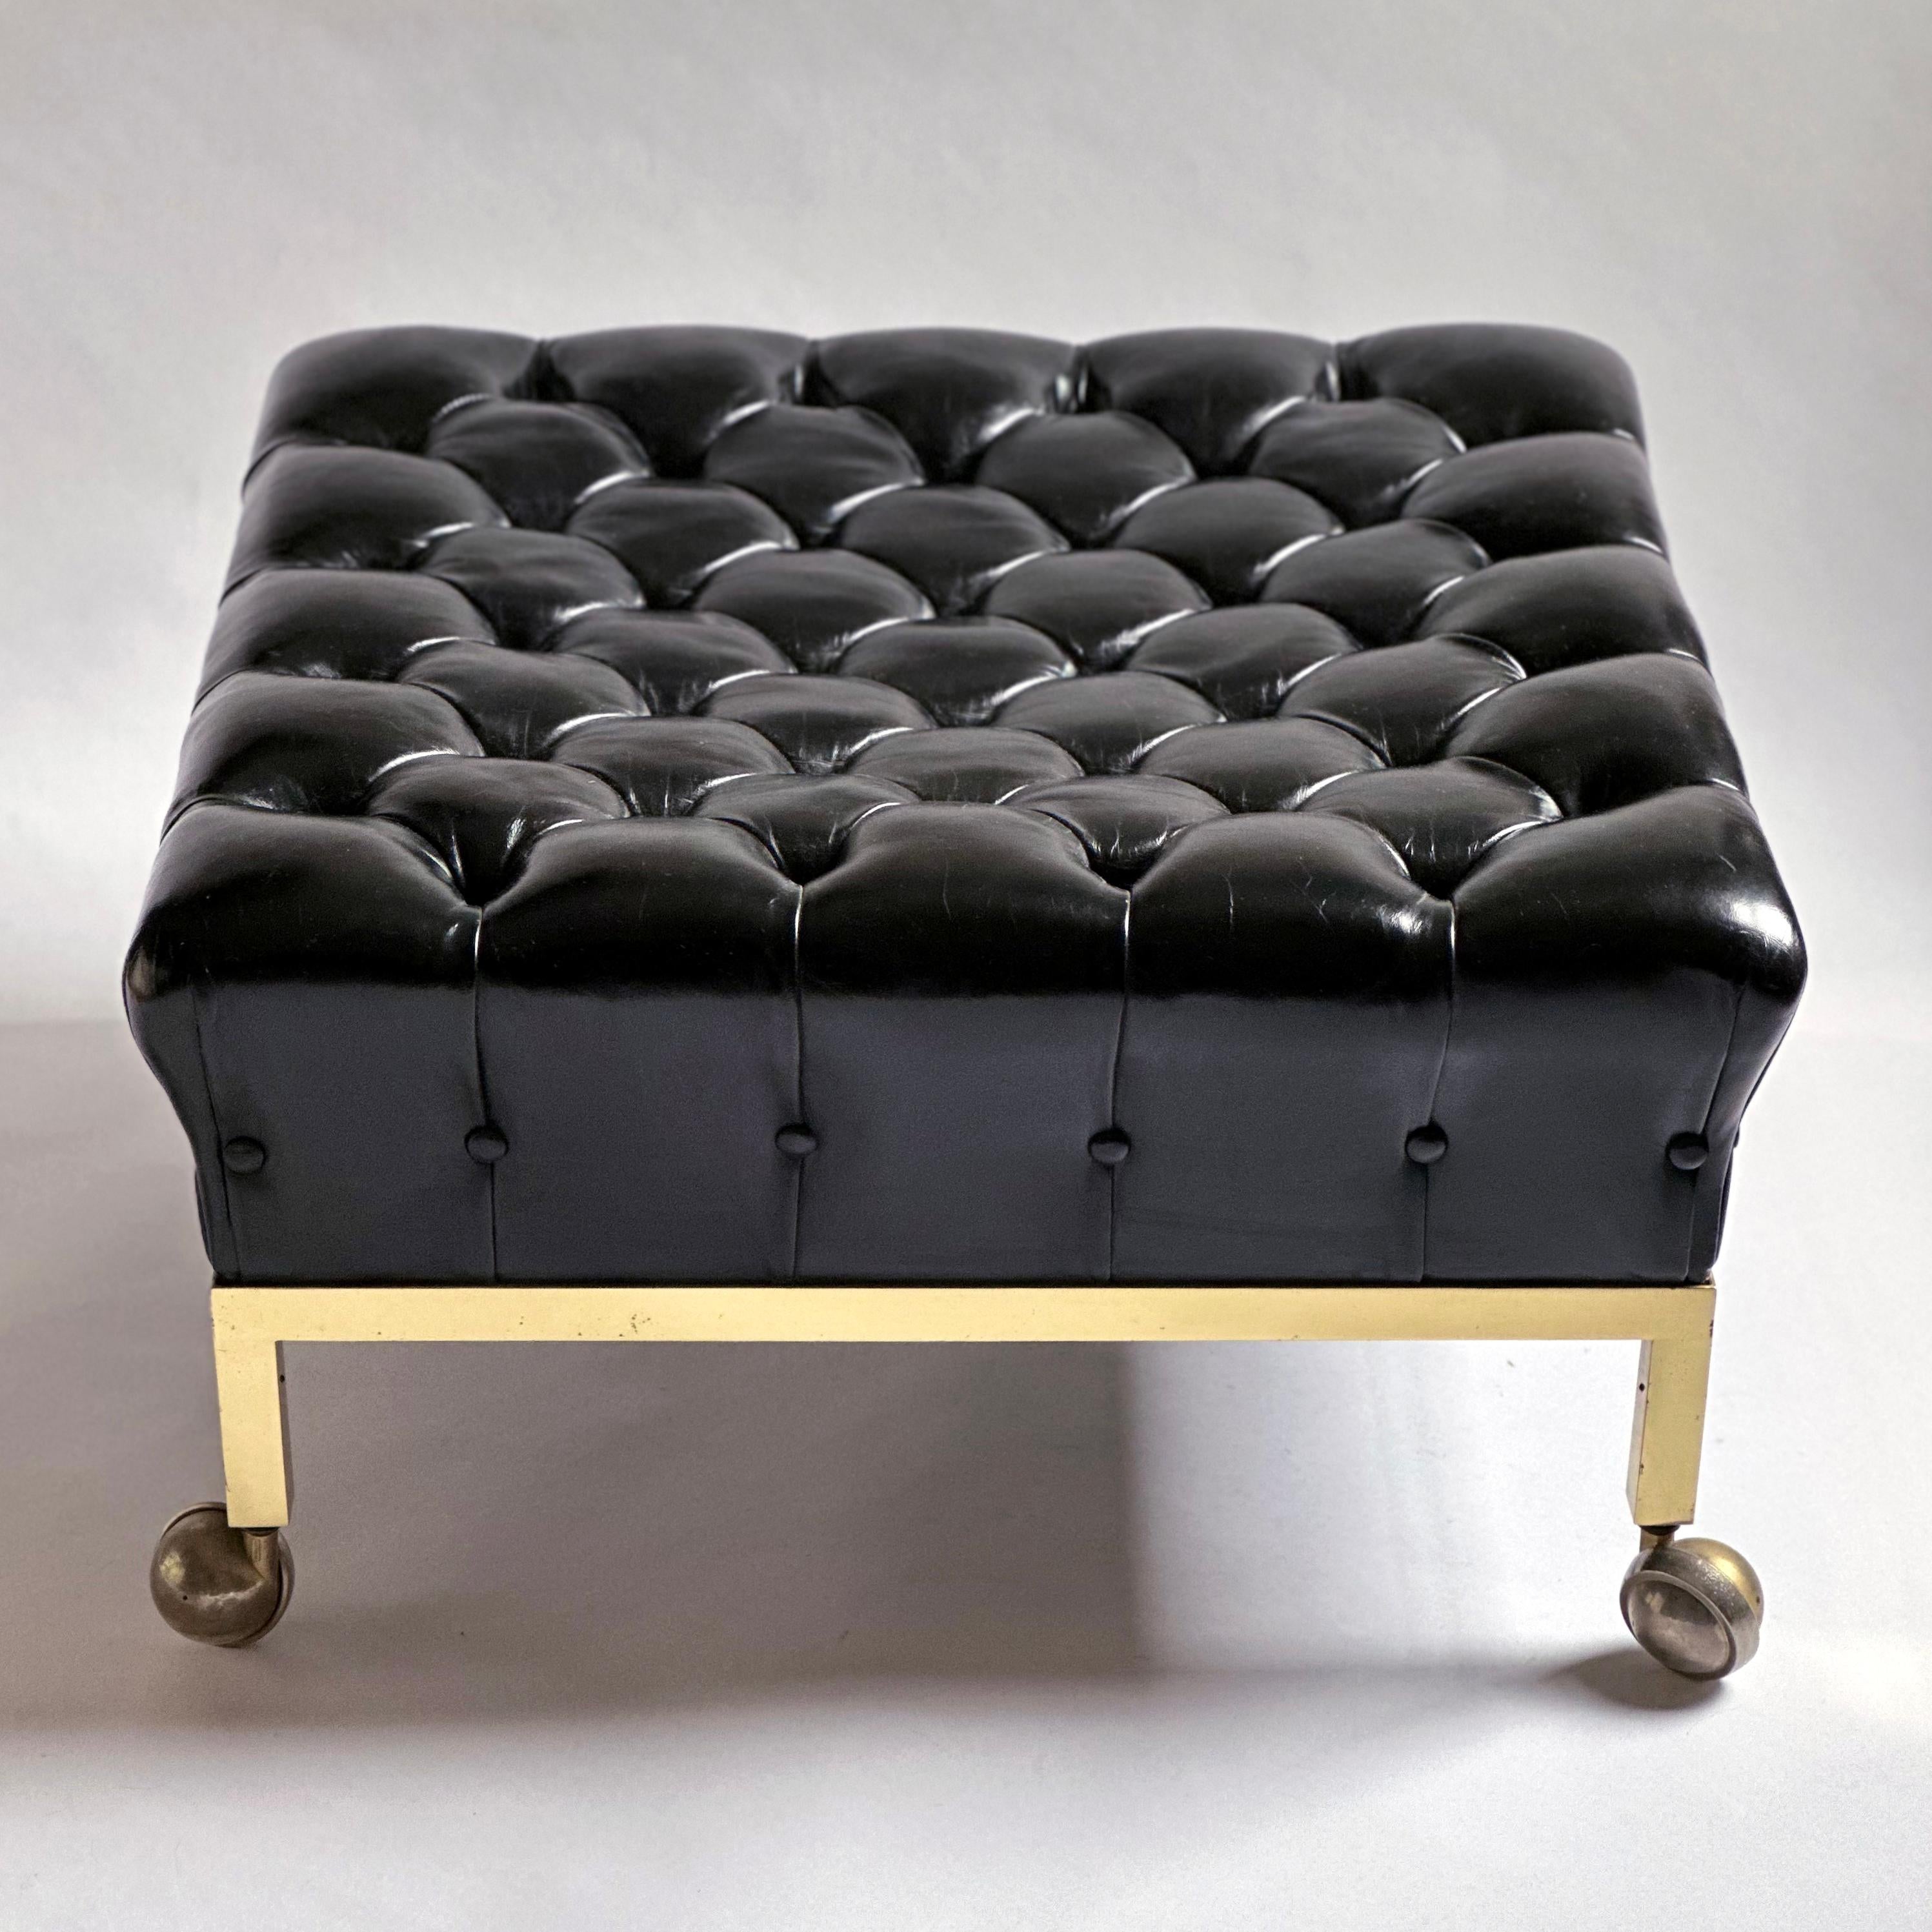 Square, brass-framed ottoman on casters with its original biscuit tufted, black leather upholstery, designed by Harvey Probber. 1960s.